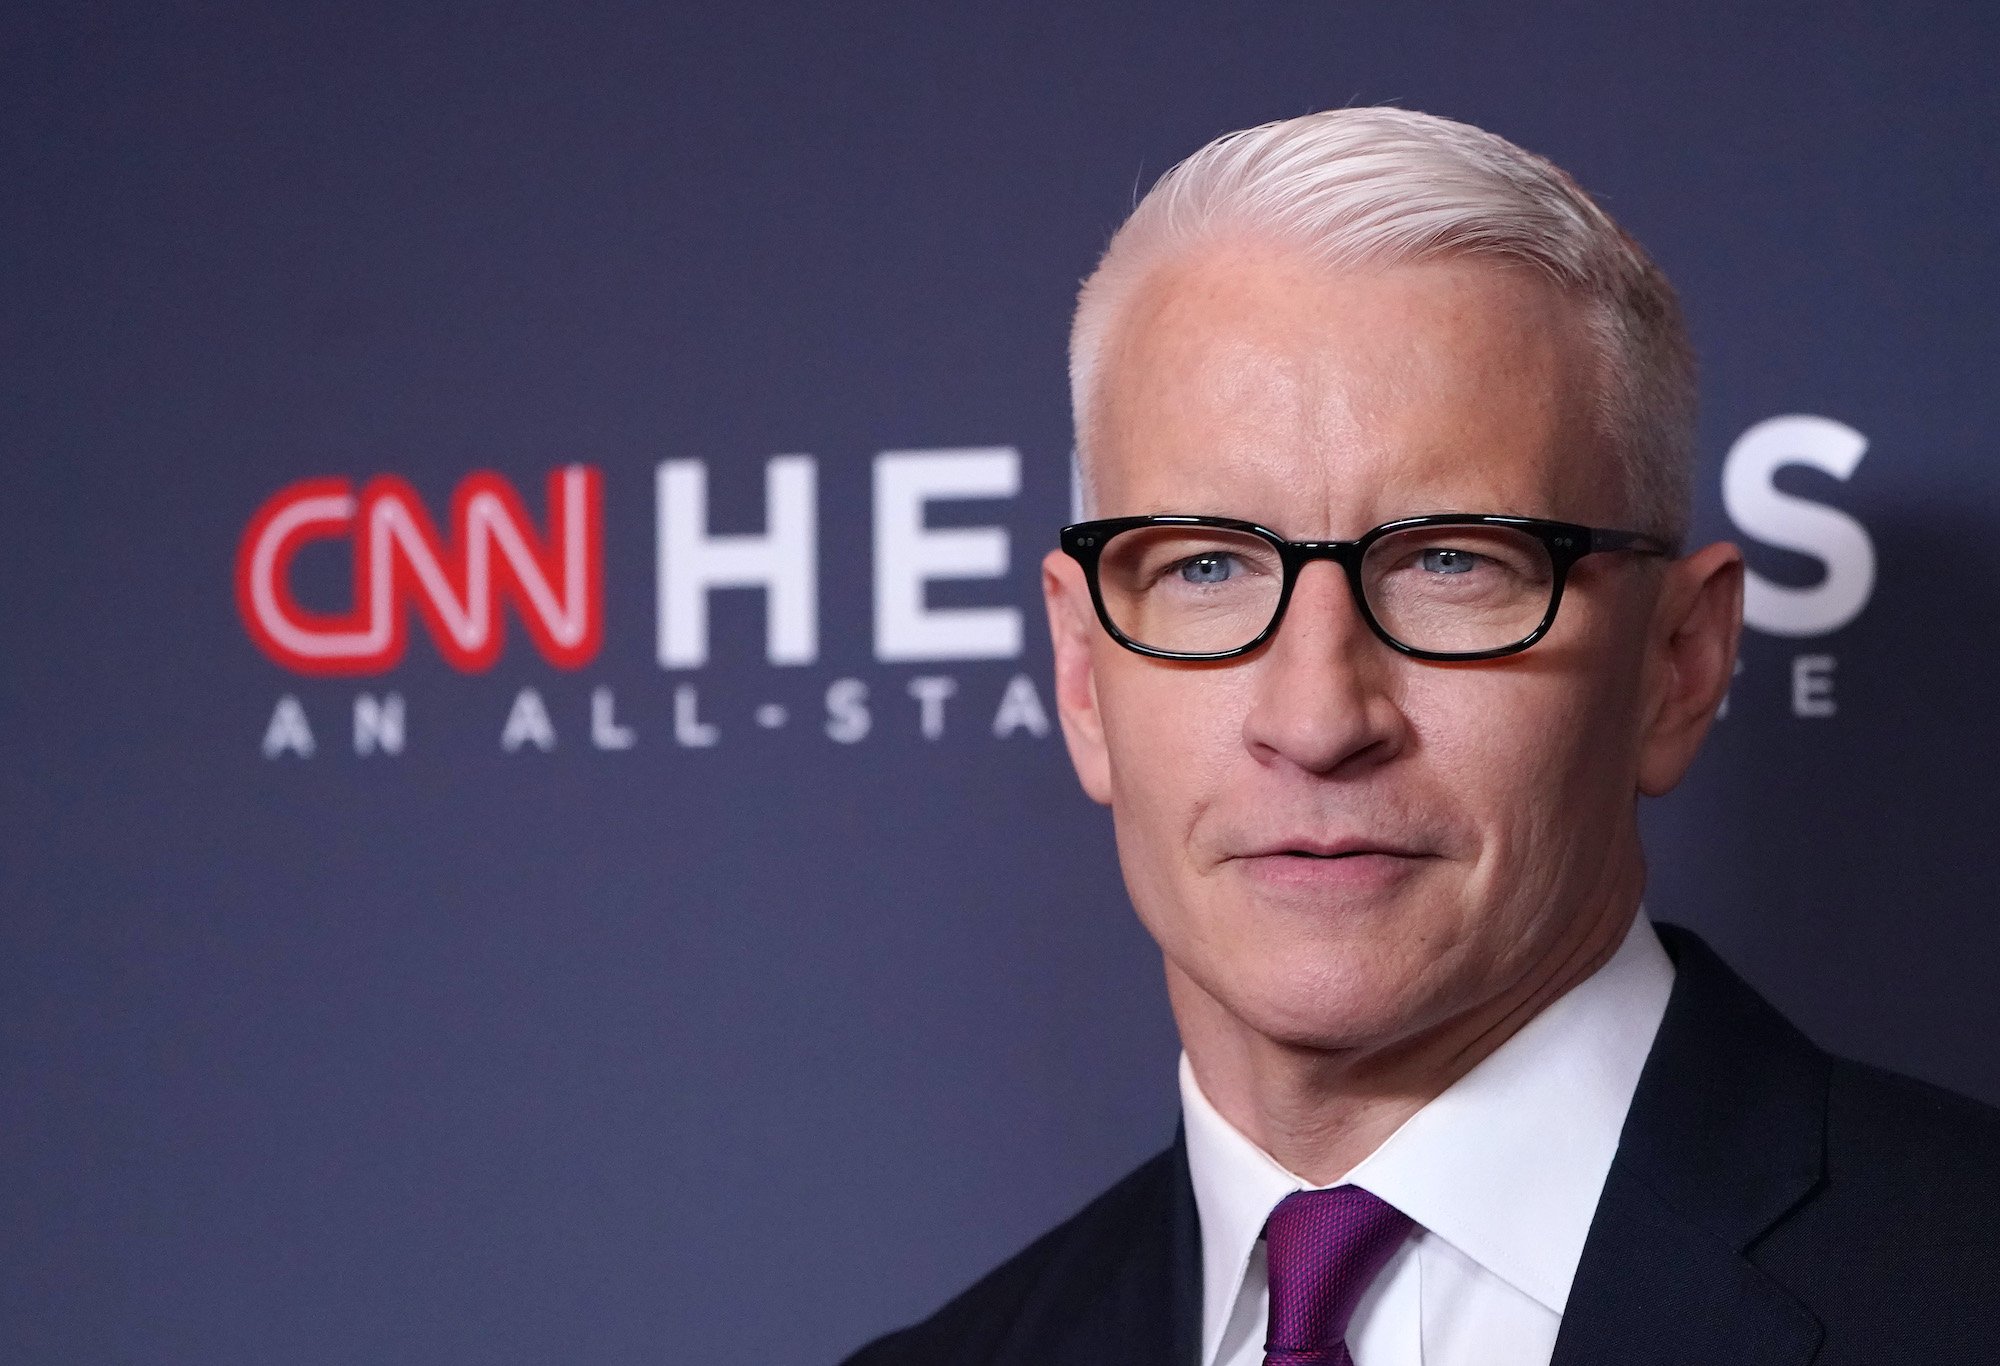 When Did Anderson Cooper's Hair Turn White?